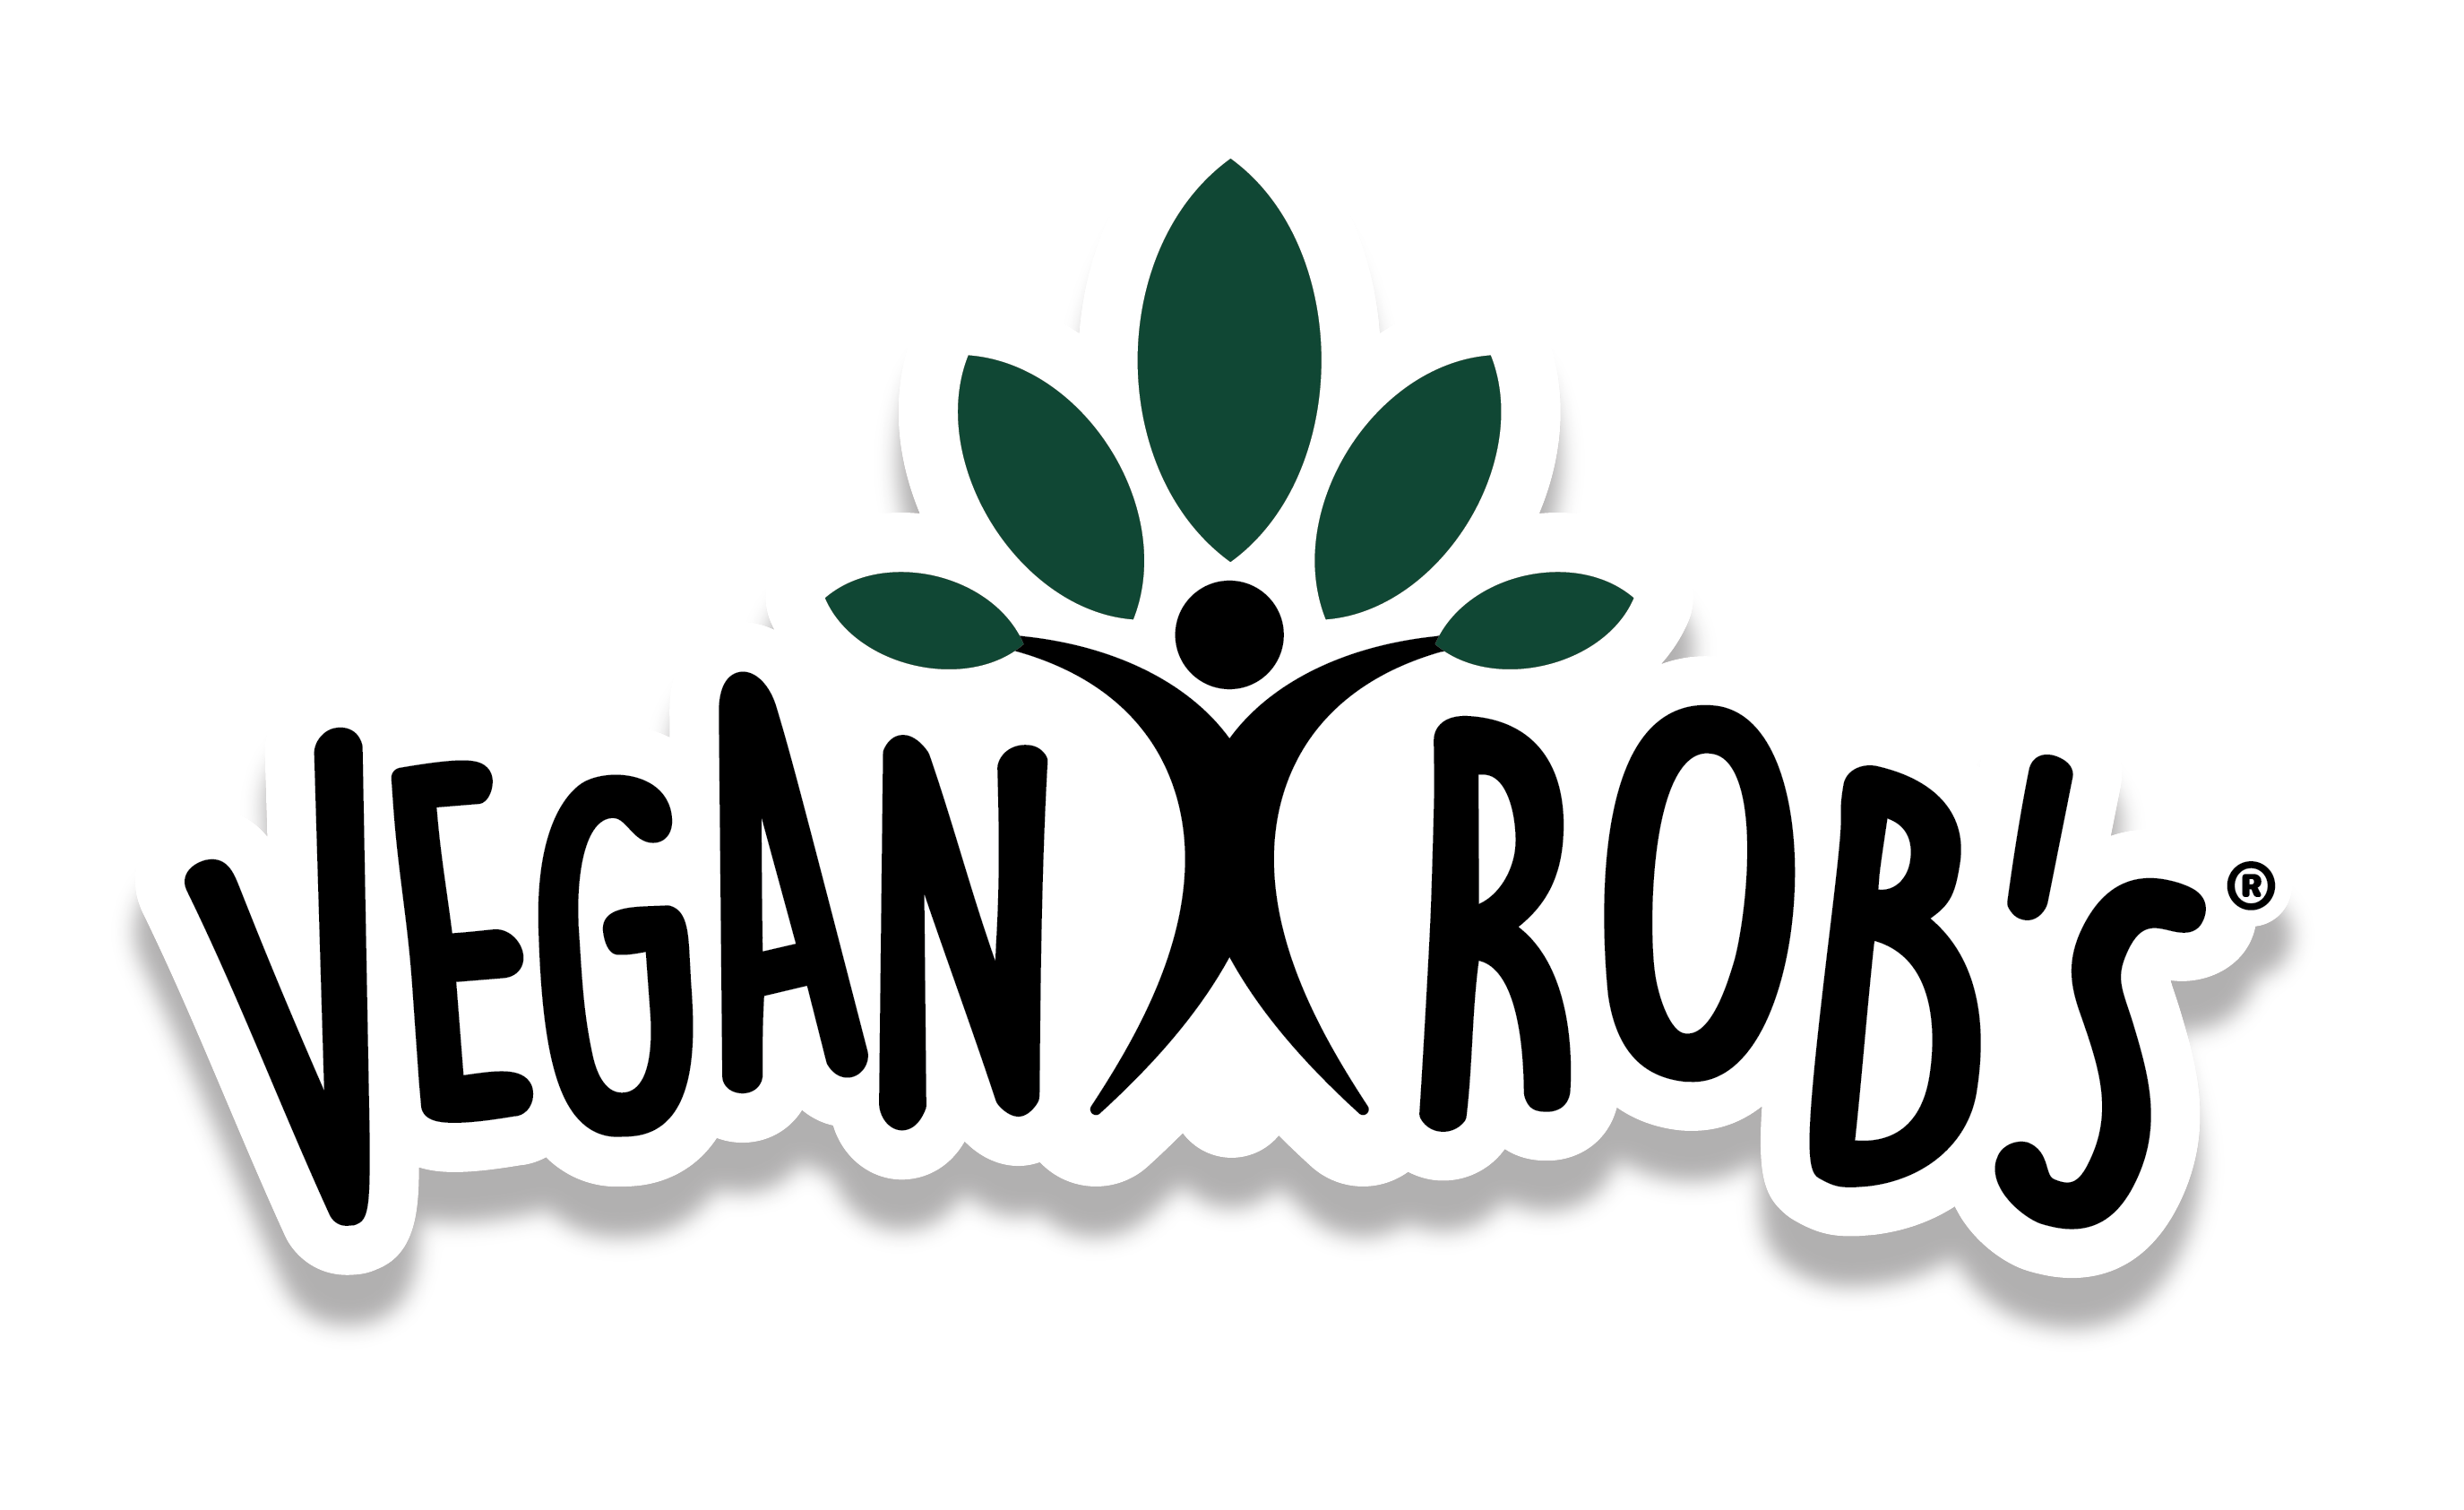 The Vegan Rob's logo. Vegan Rob's was a sponsor of the 1st Annual Animal Heroes' Event, organized by Lady Freethinker.